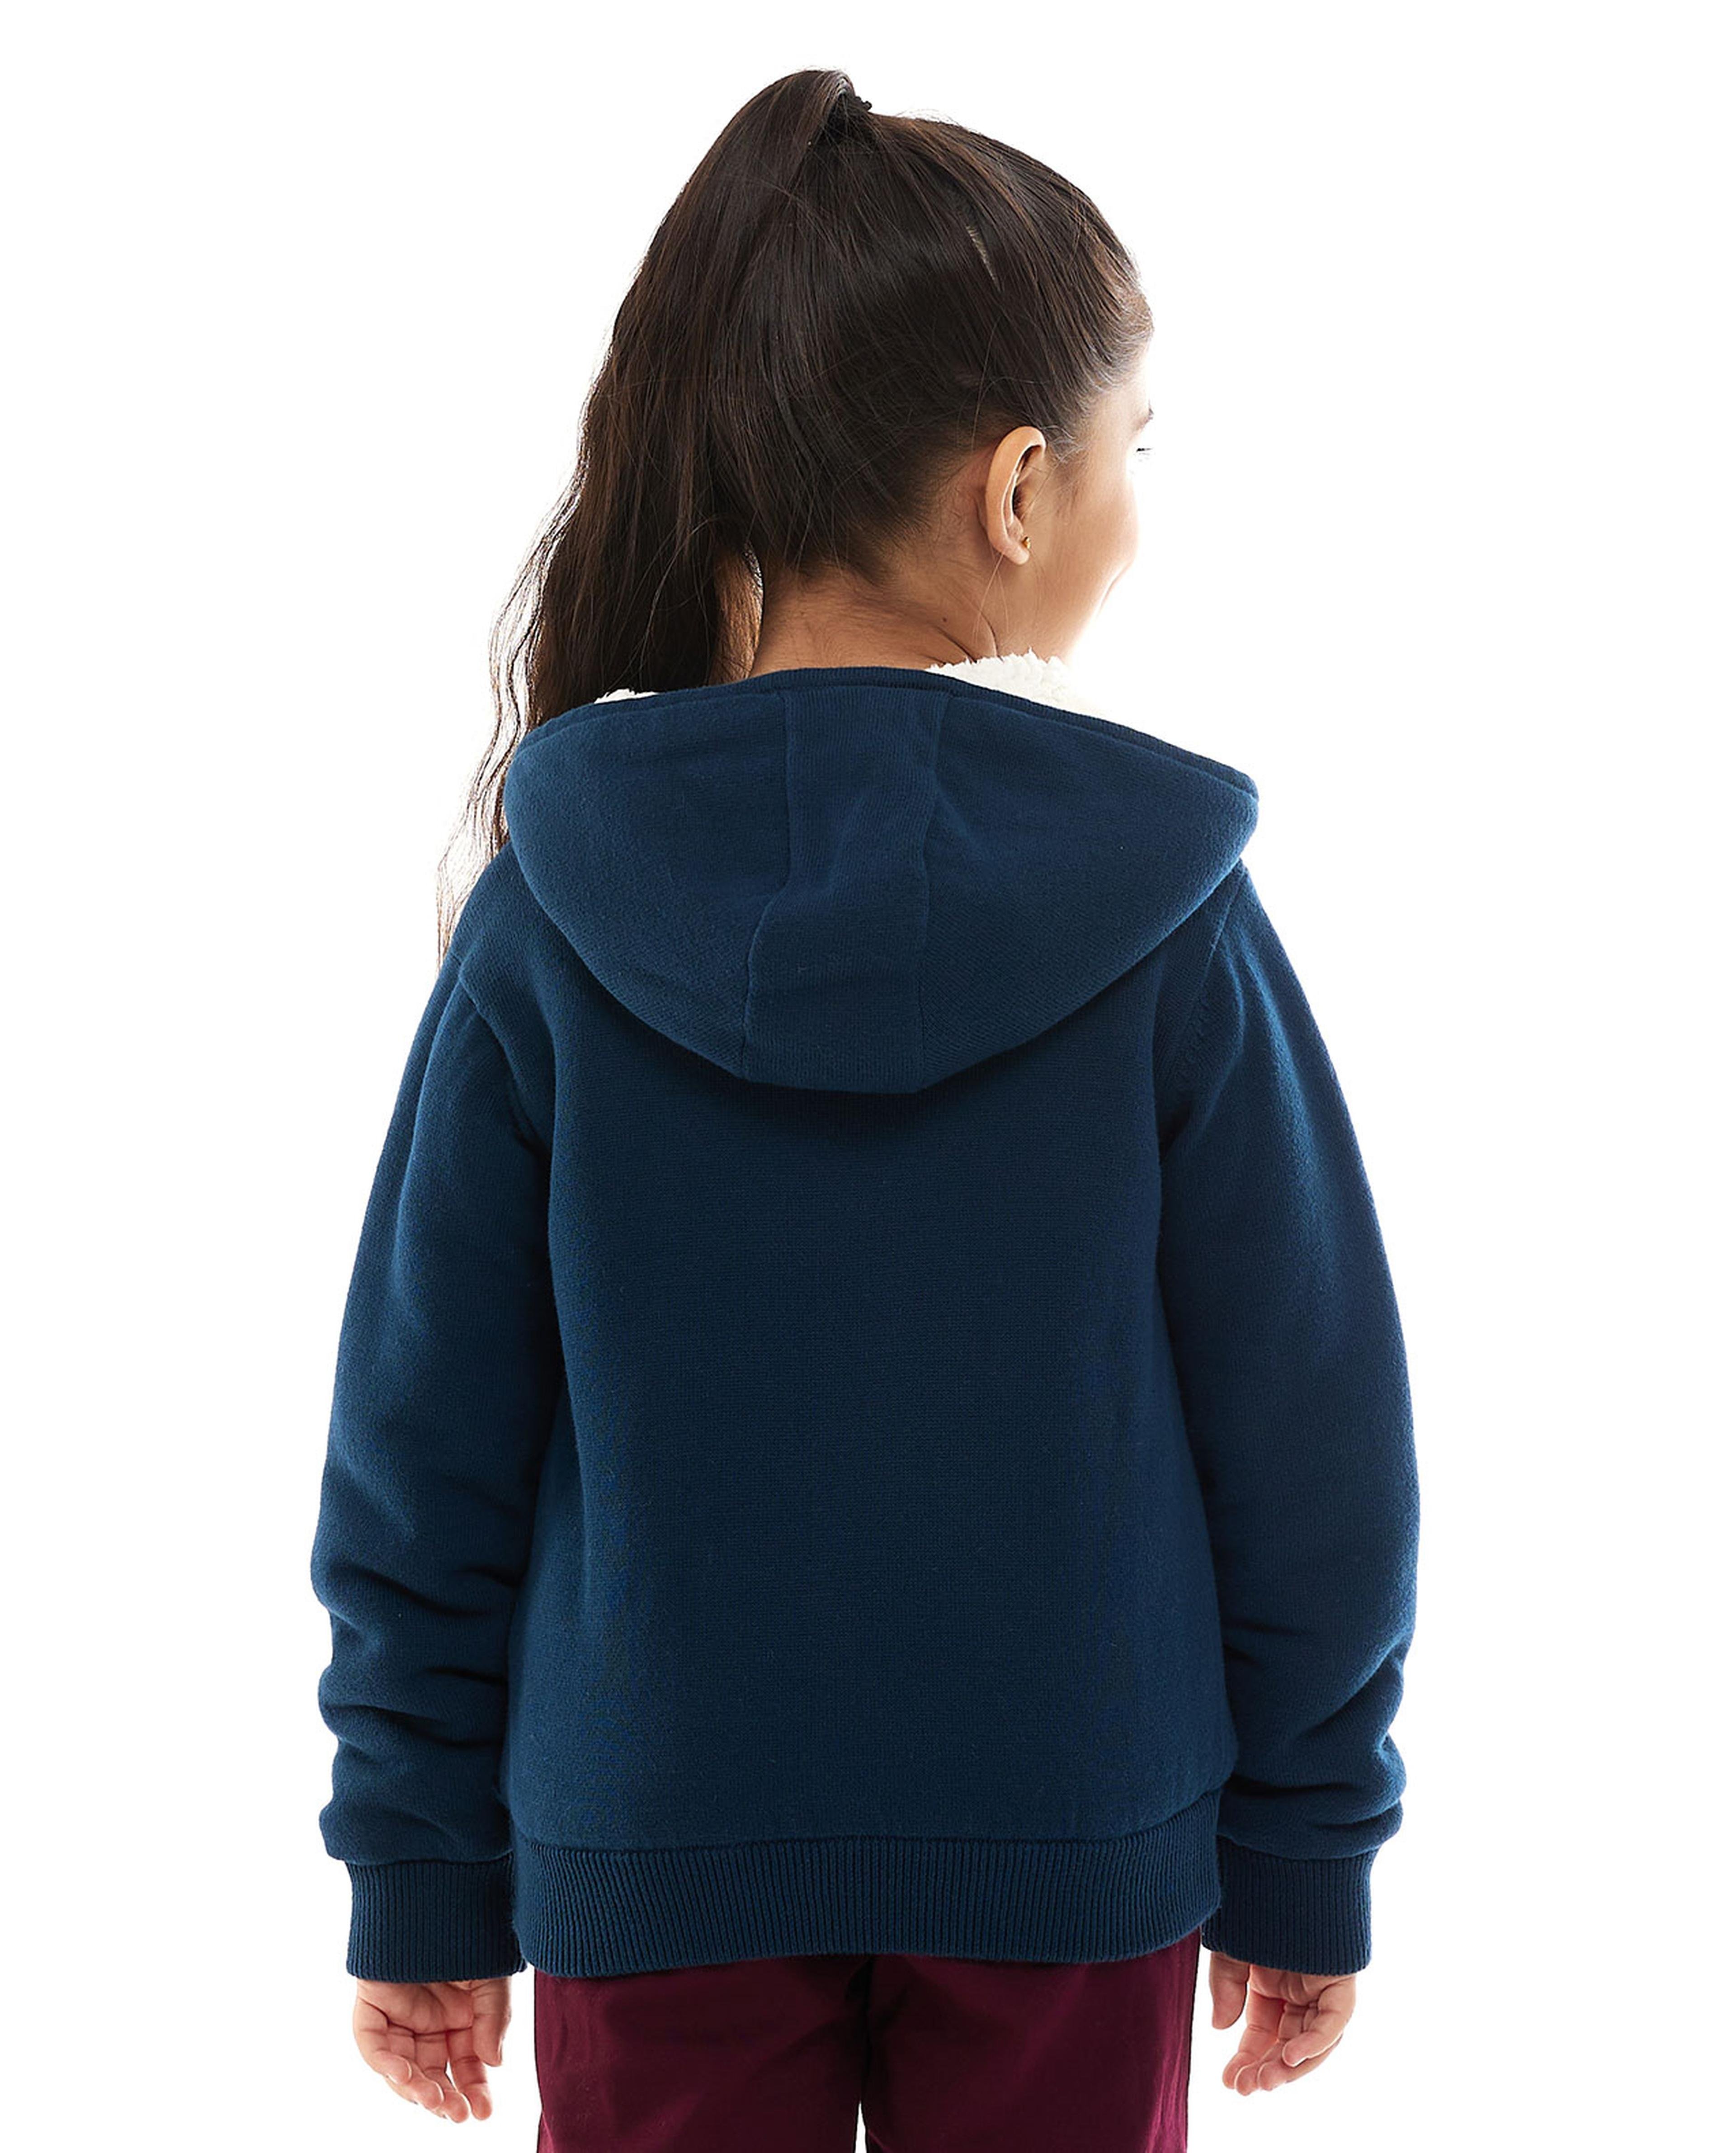 Embroidered Hooded Jacket with Zipper Closure